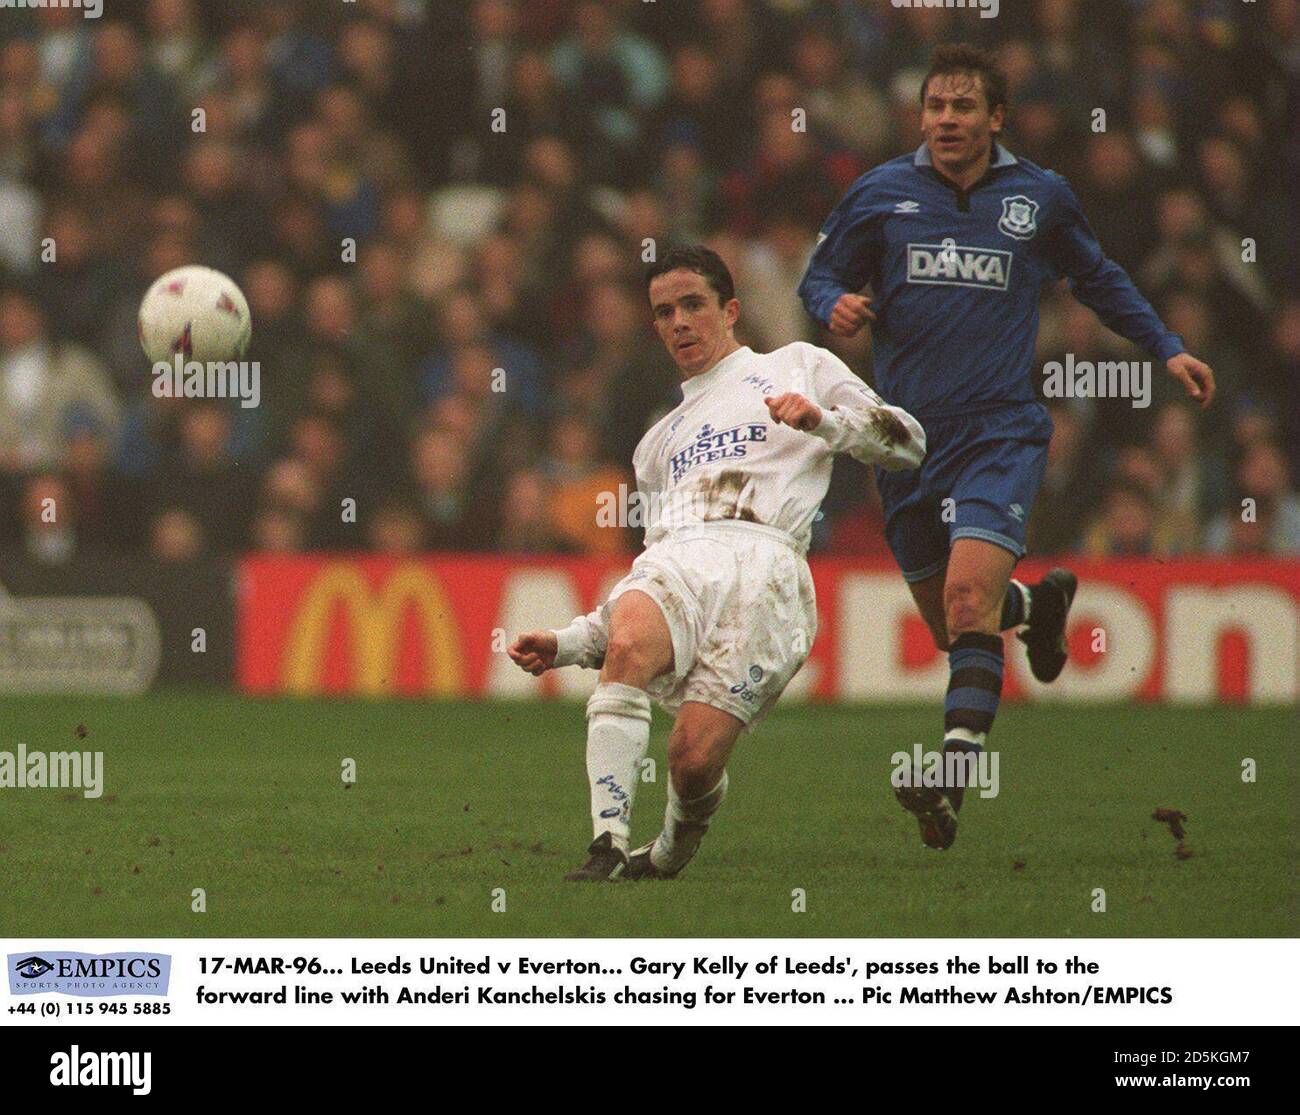 17-MAR-96.  Leeds United v Everton.  Gary Kelly of Leeds', passes the ball to the forward line with Andrei Kanchelskis chasing for Everton Stock Photo